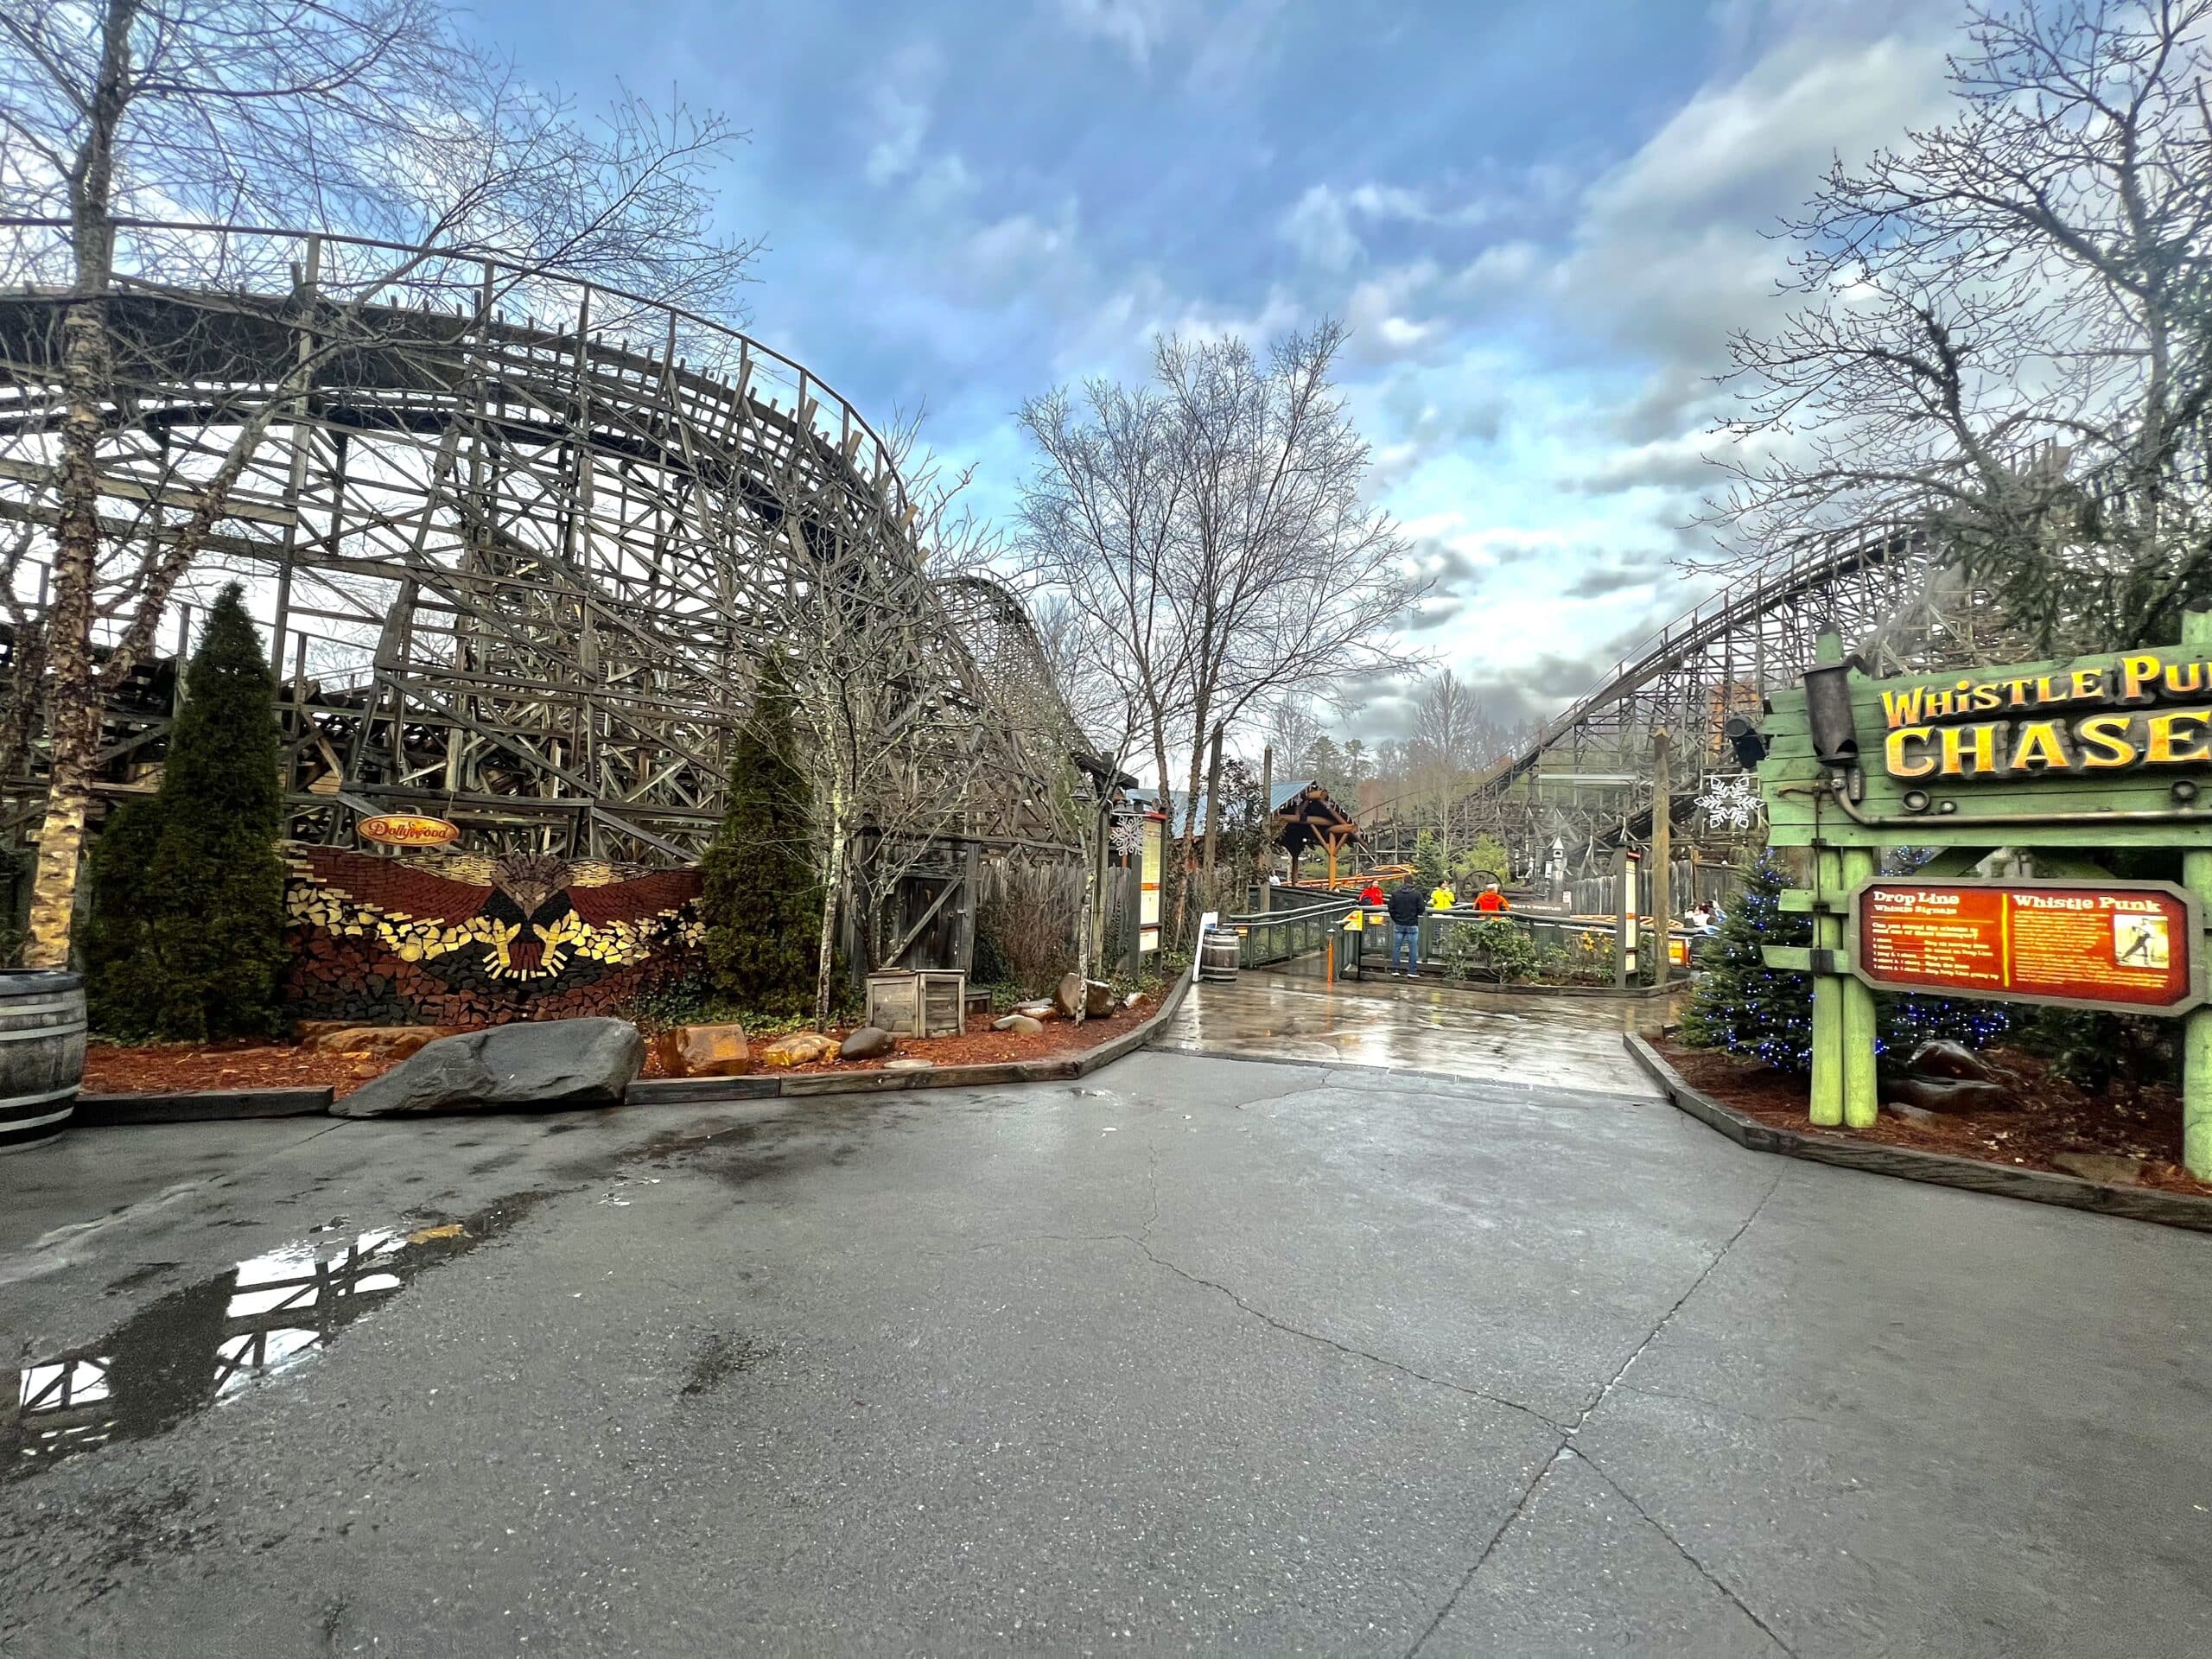 Dollywood Whistle Punk And Thunderhead: Dollywood Wooden Roller Coasters